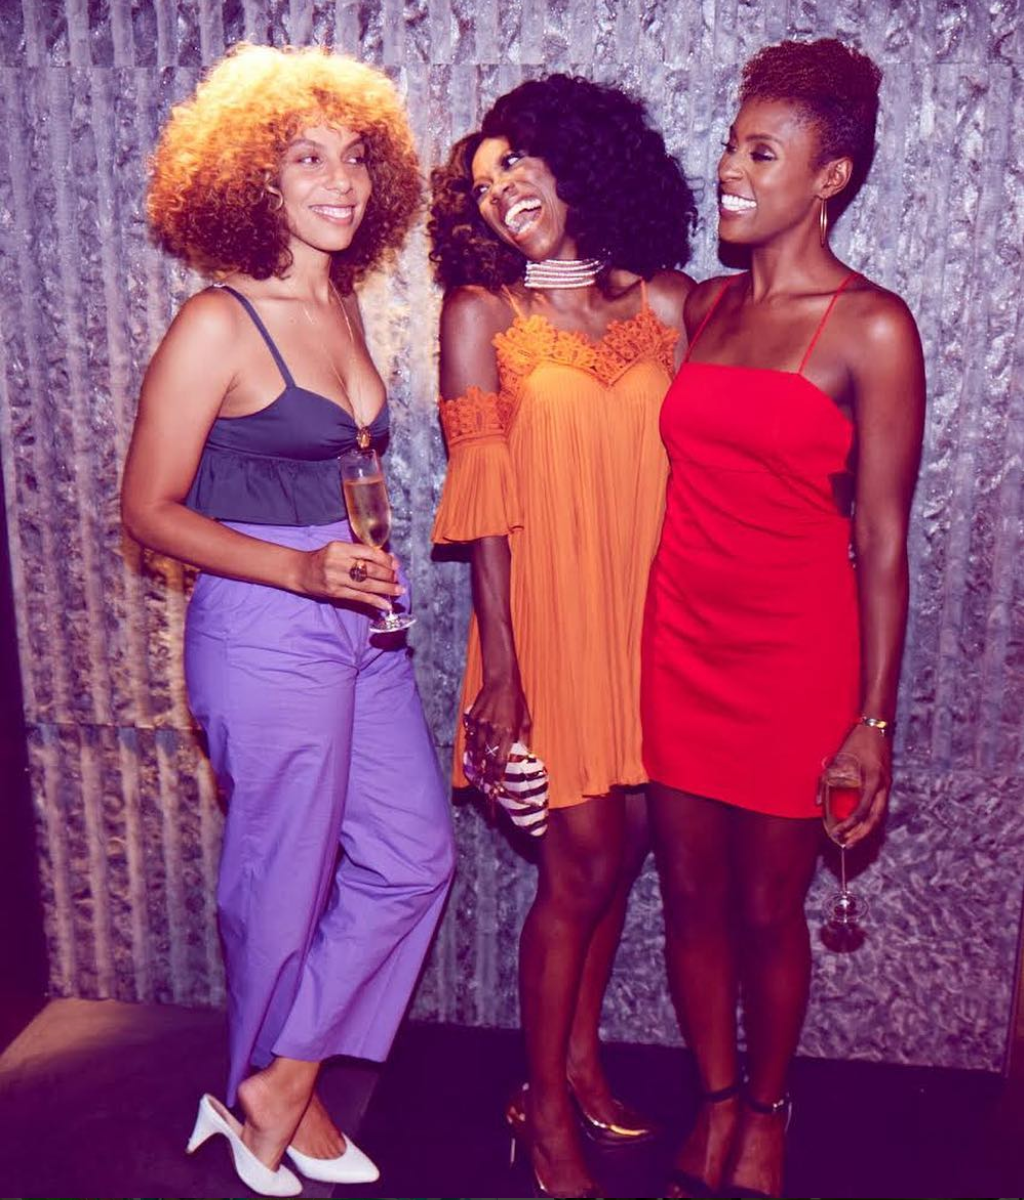 Photographic Proof That Issa Rae Has The Best Girl Squad In Hollywood
